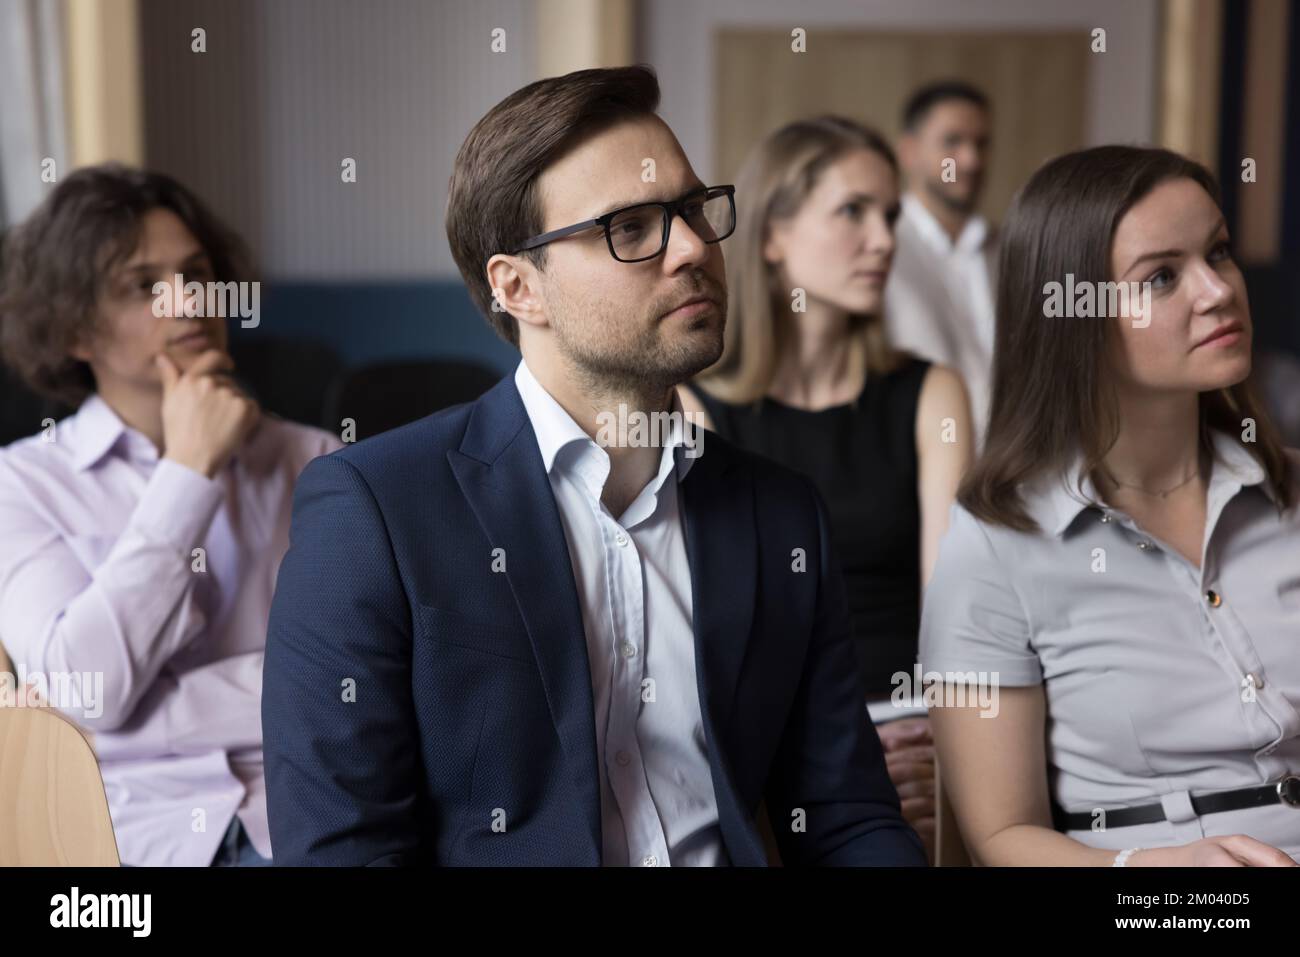 Group of businesspeople listening speech of business trainer Stock Photo